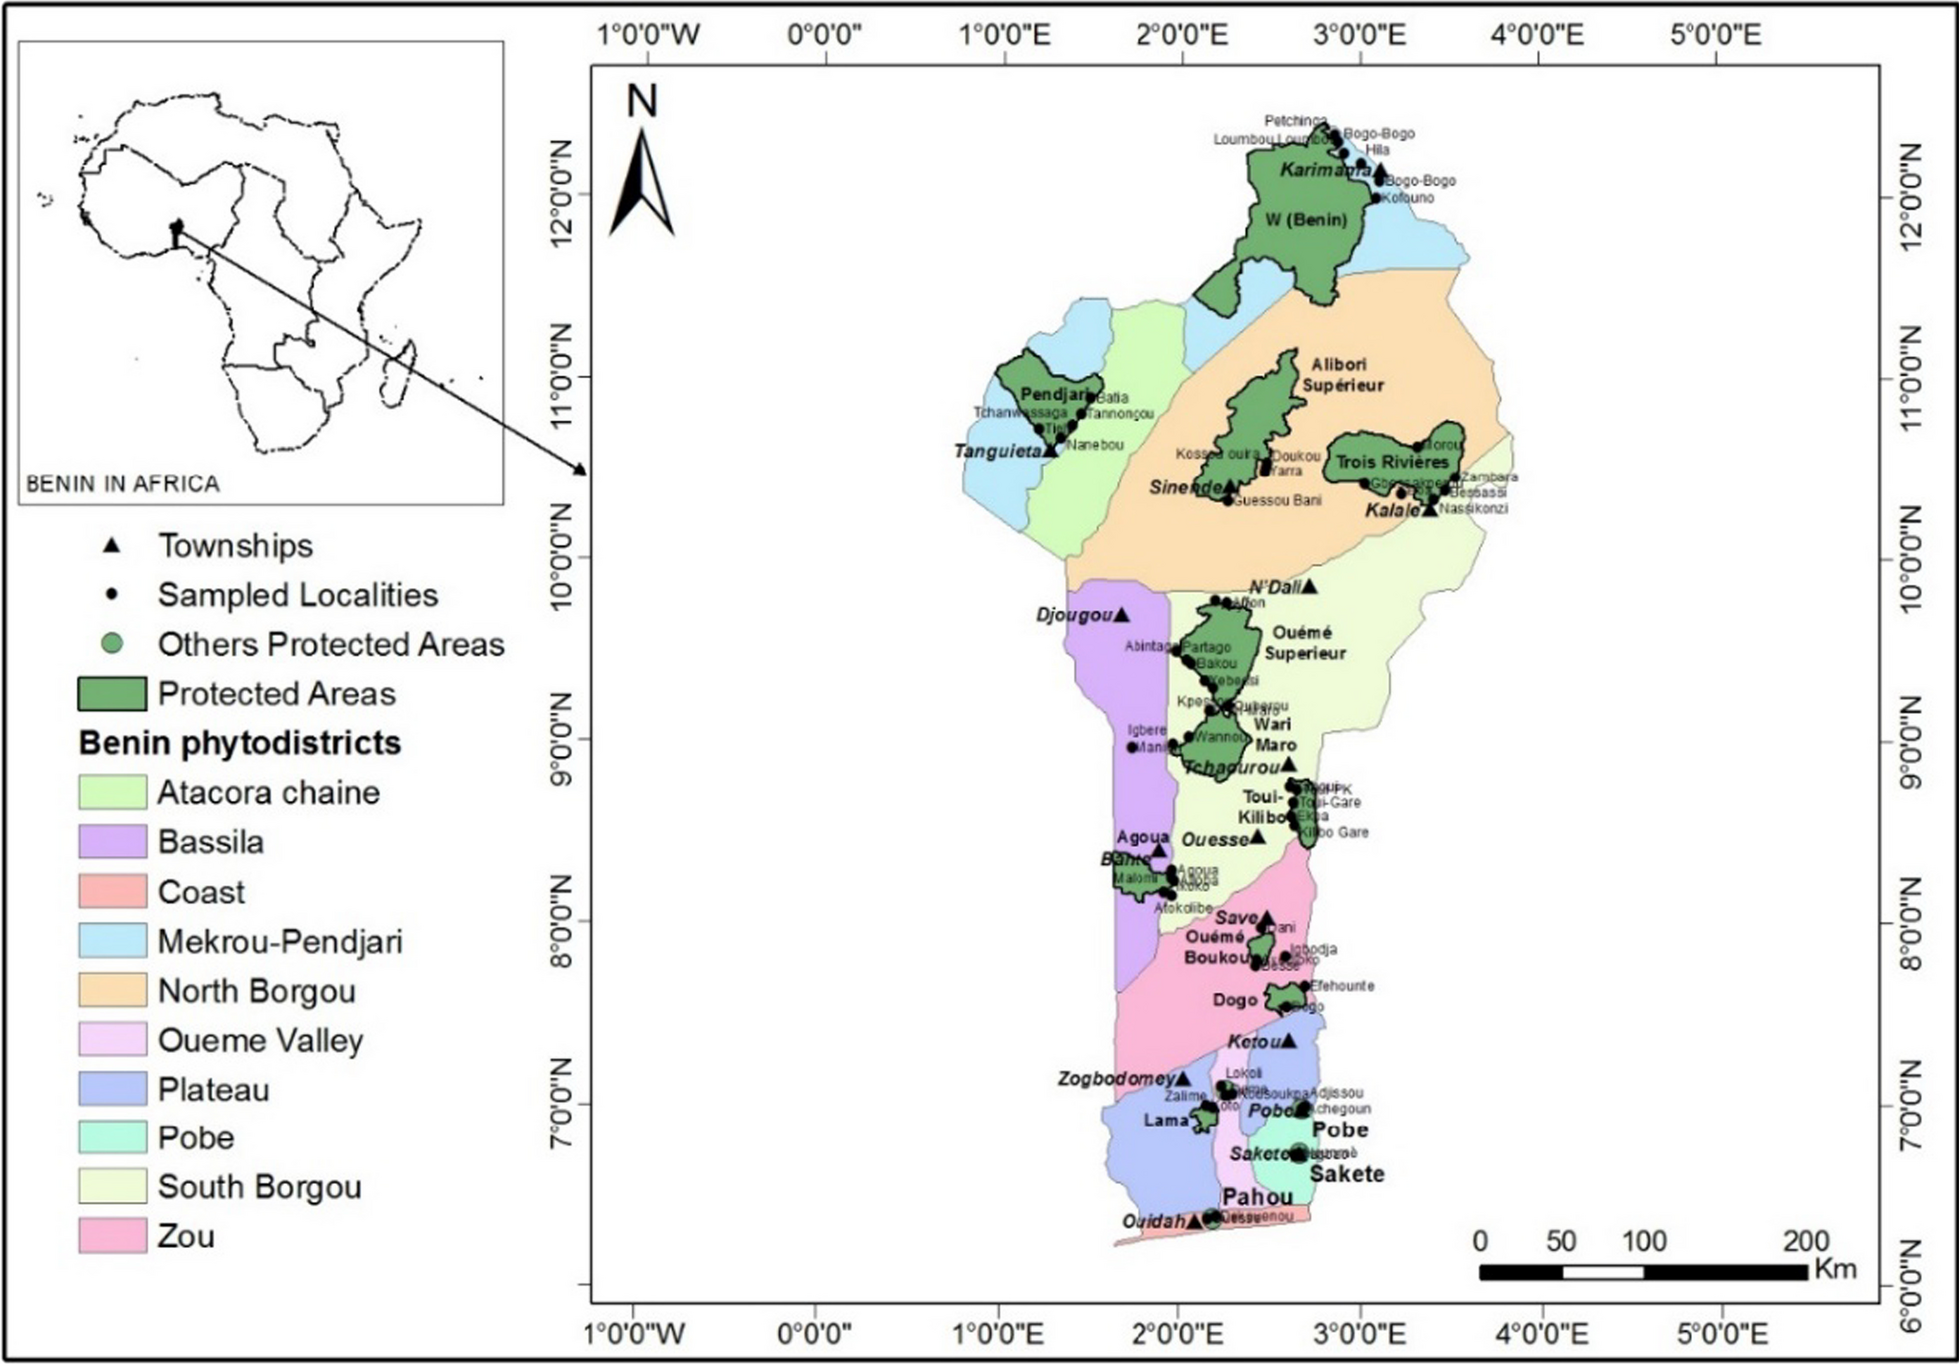 How do plant demographic and ecological traits combined with social dynamics and human traits affect woody plant selection for medicinal uses in Benin (West Africa)?